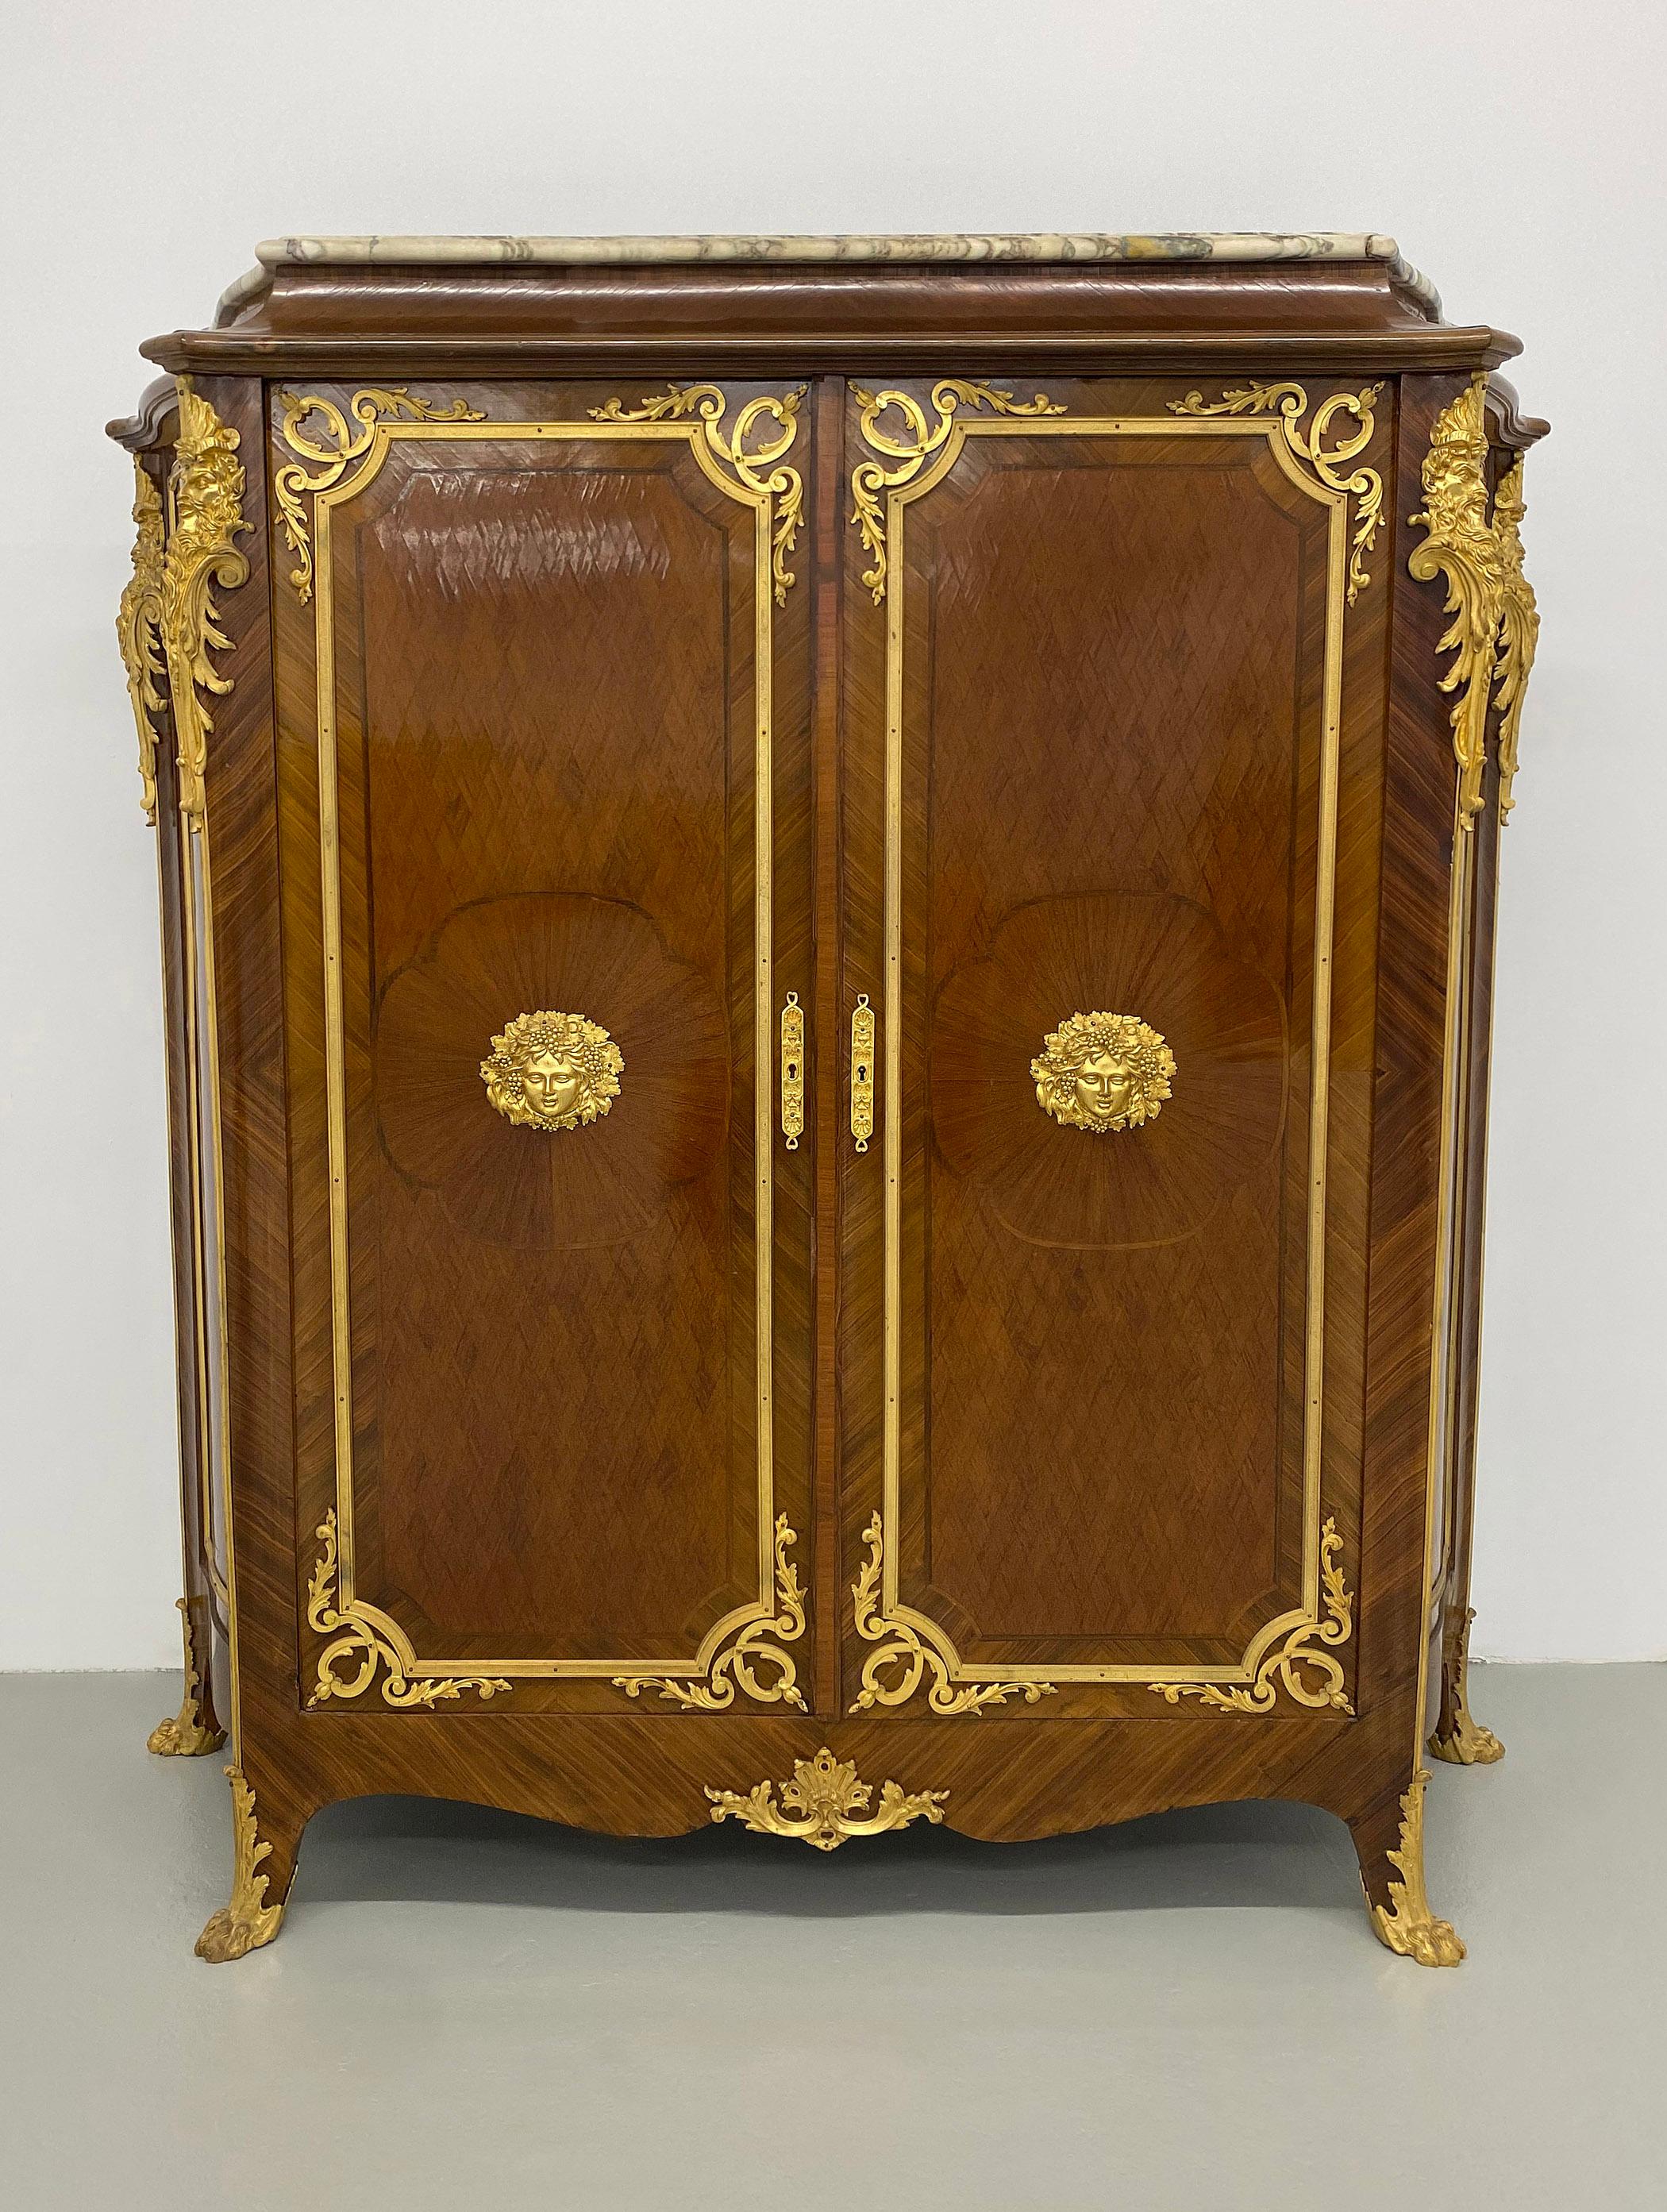 Belle Époque Nice Late 19th Century Gilt Bronze Mounted Transitional Style Parquetry Cabinet For Sale